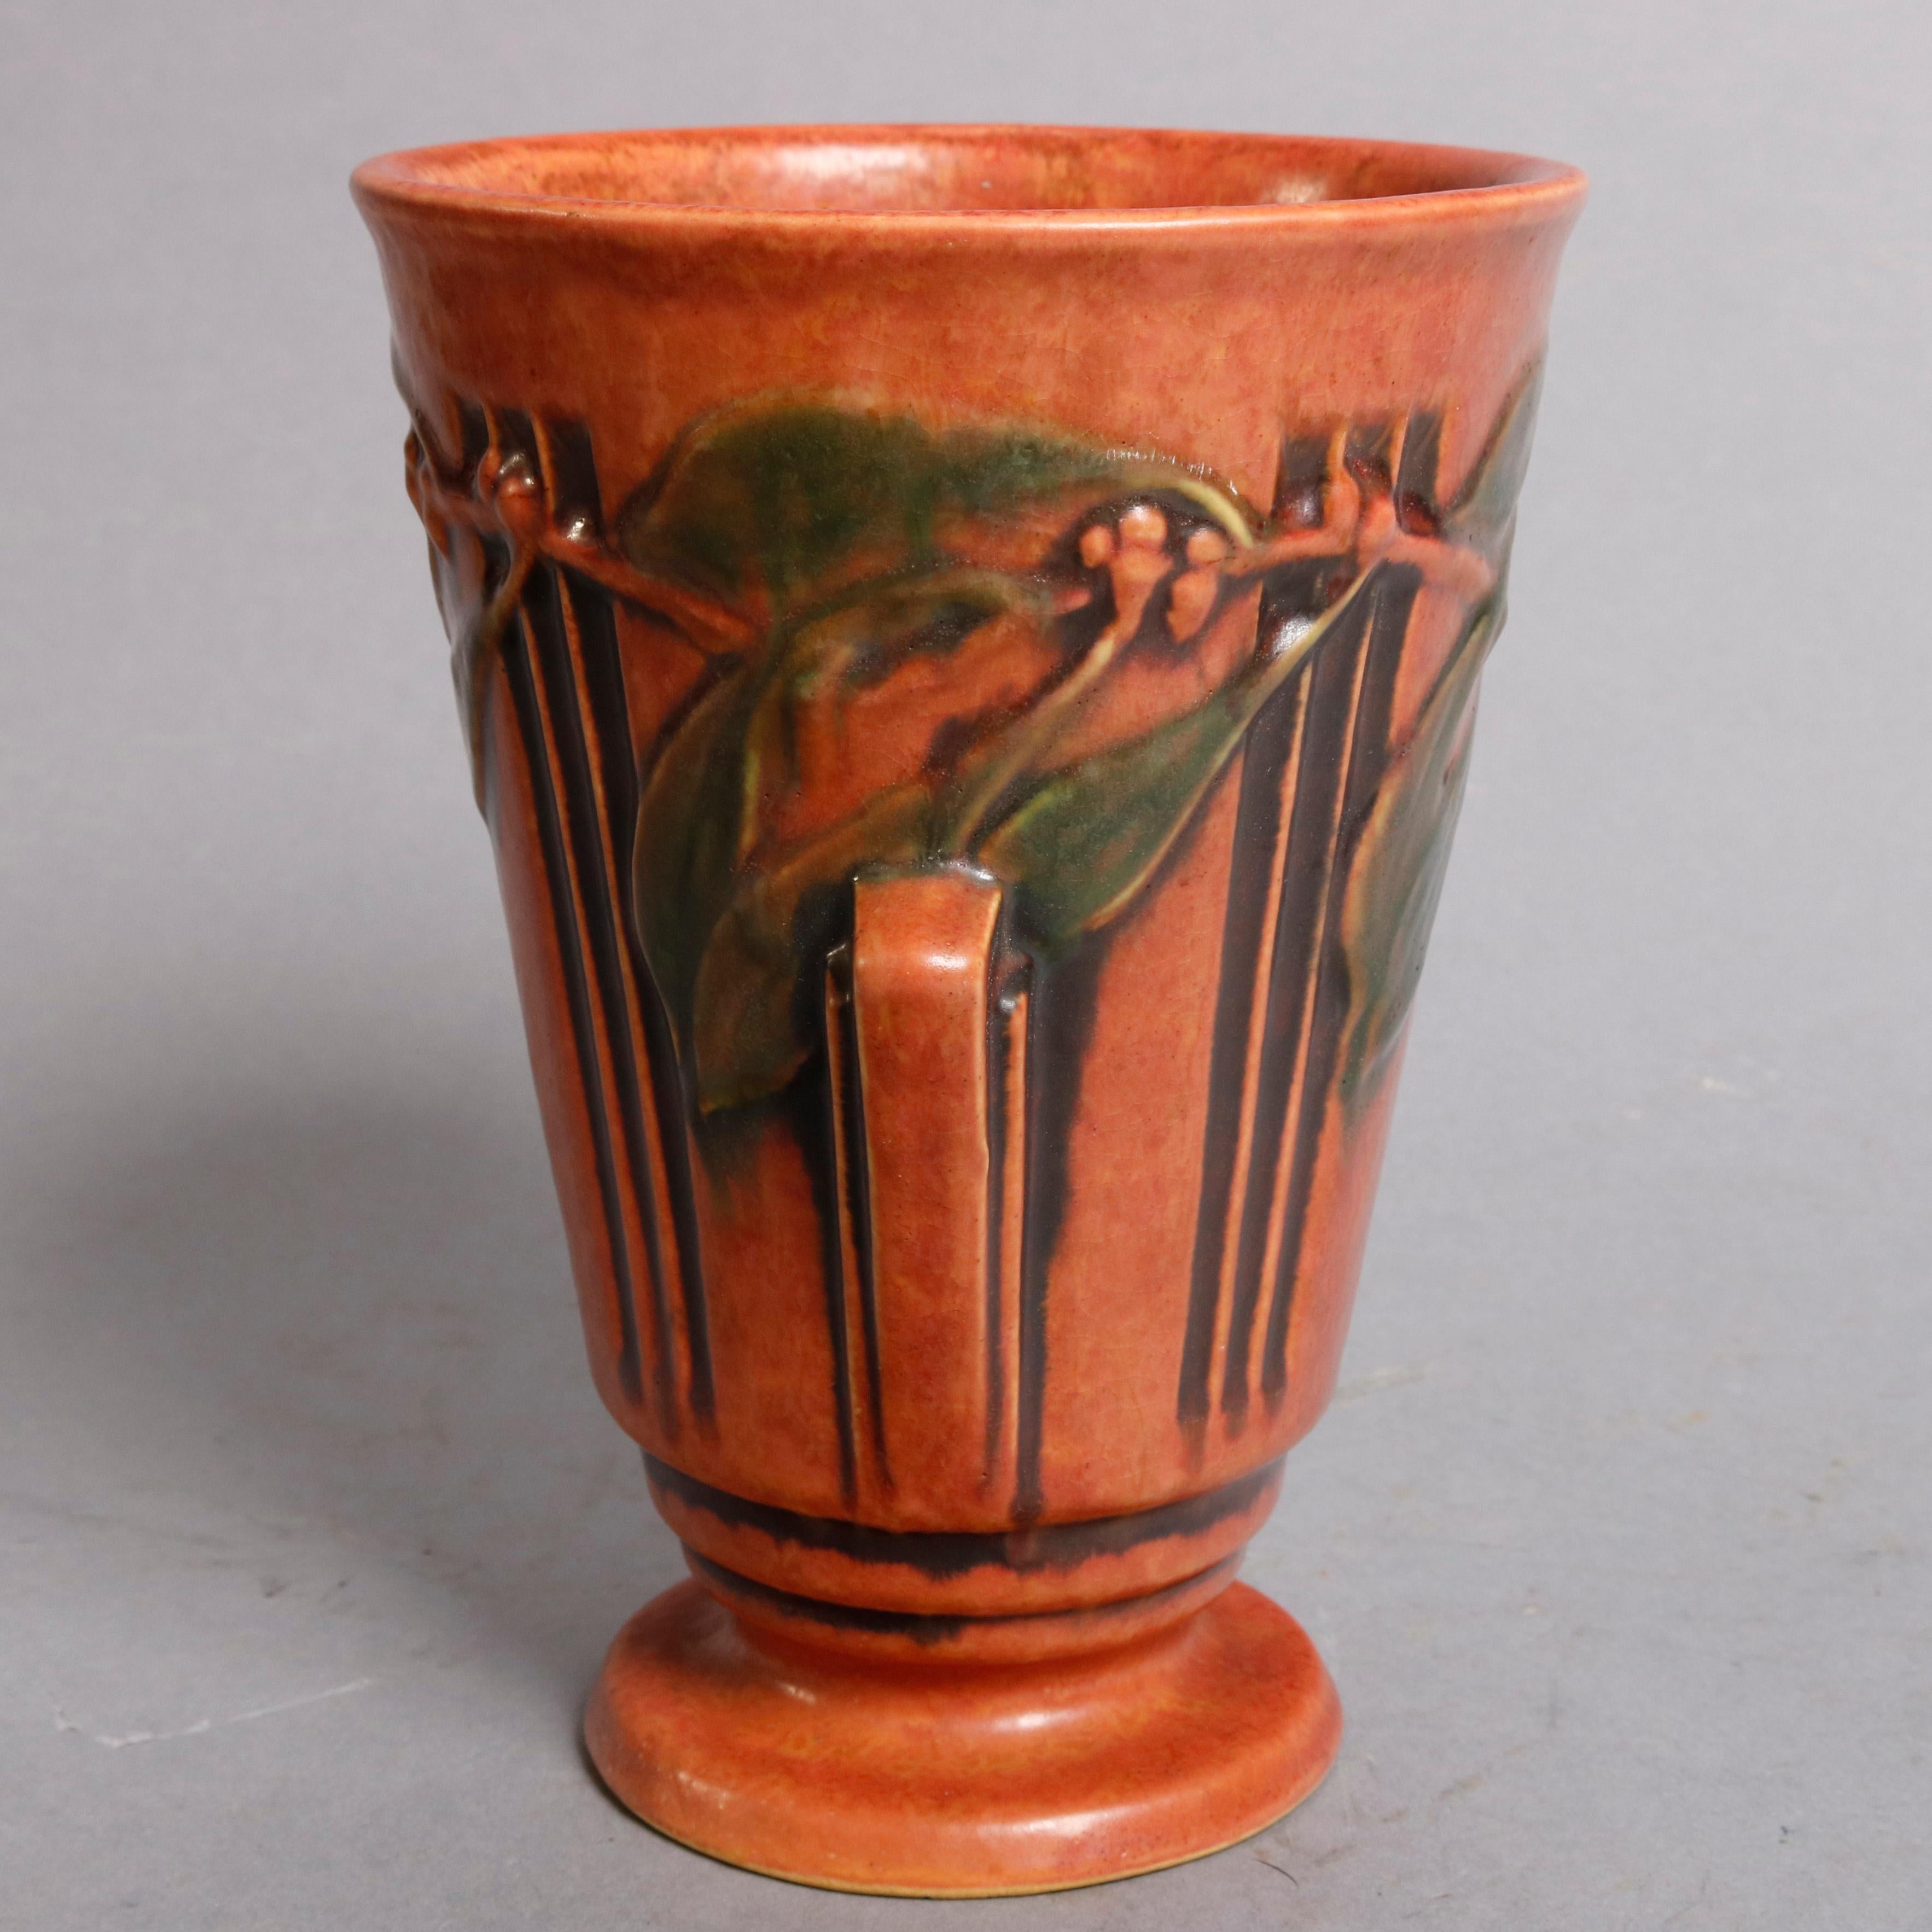 An antique Art Deco art pottery vase by Roseville in the Laurel pattern offers tapered form with ebonized decoration and laurel surround, having double geometric form handles and seated on stepped base, circa 1930

Measures: 8.25